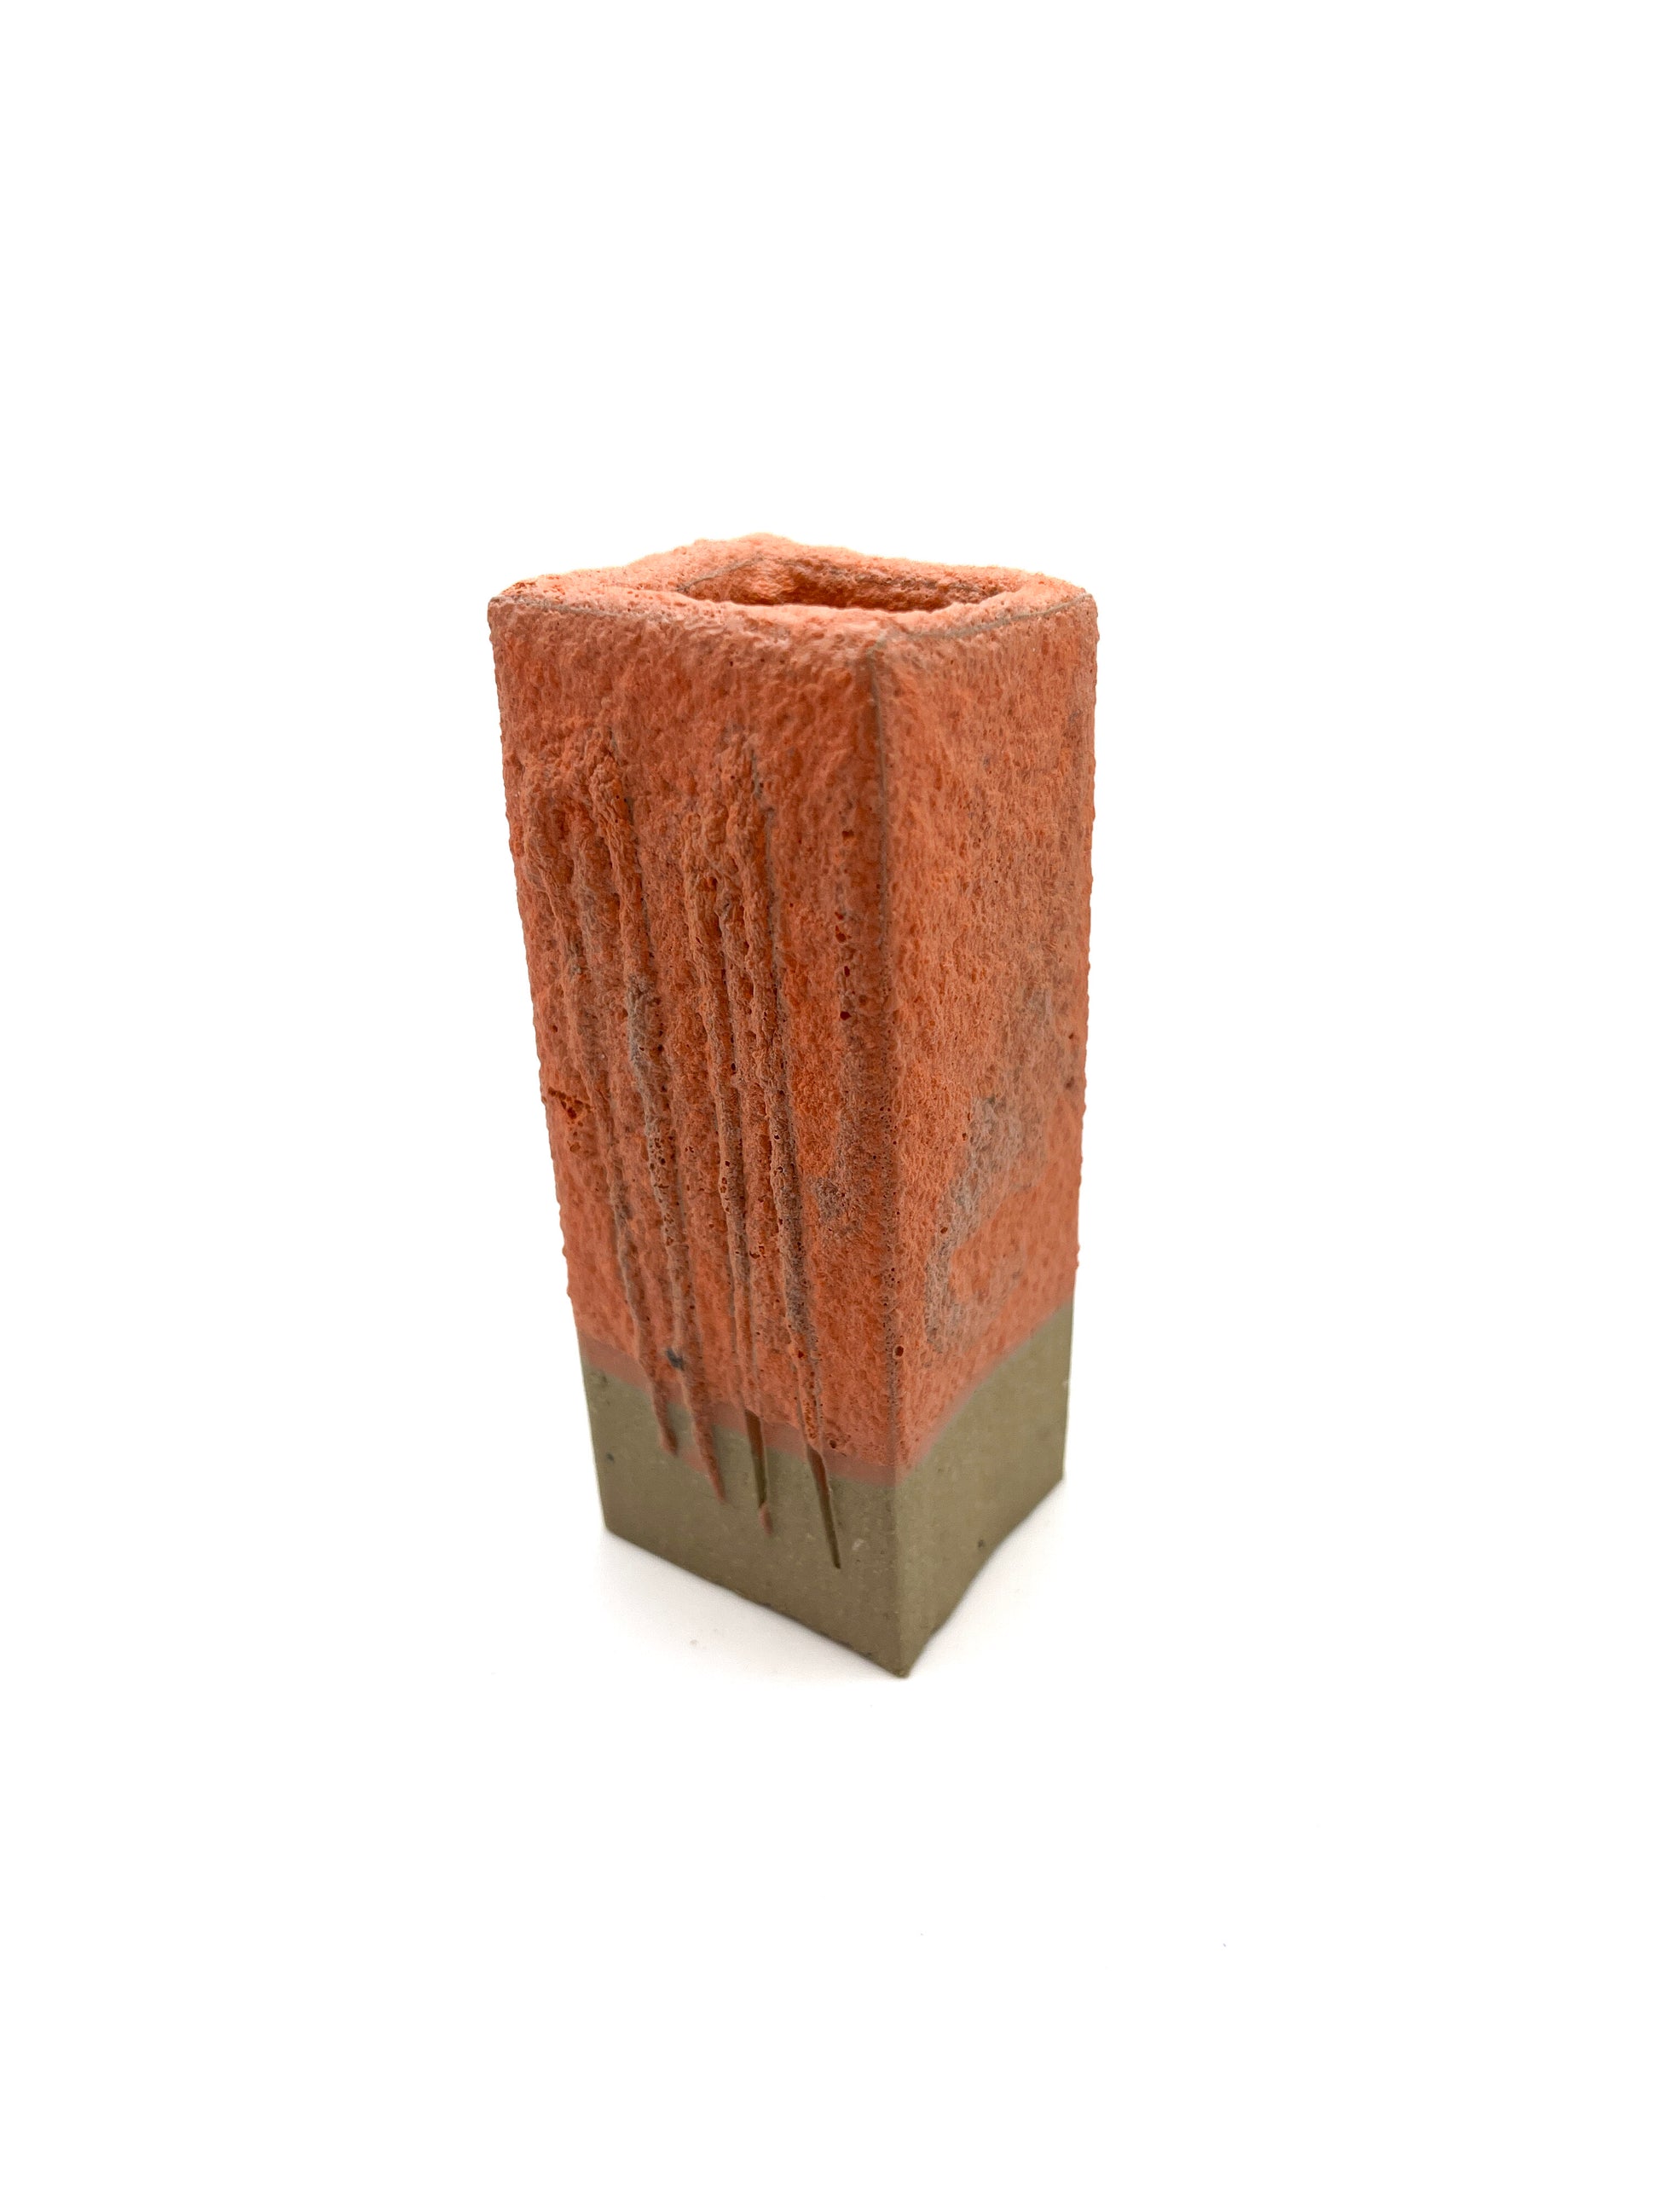 Fired test column for orange mini-puff glaze on dark clay. Fuzzy texture when fired to cone 5 or 6.